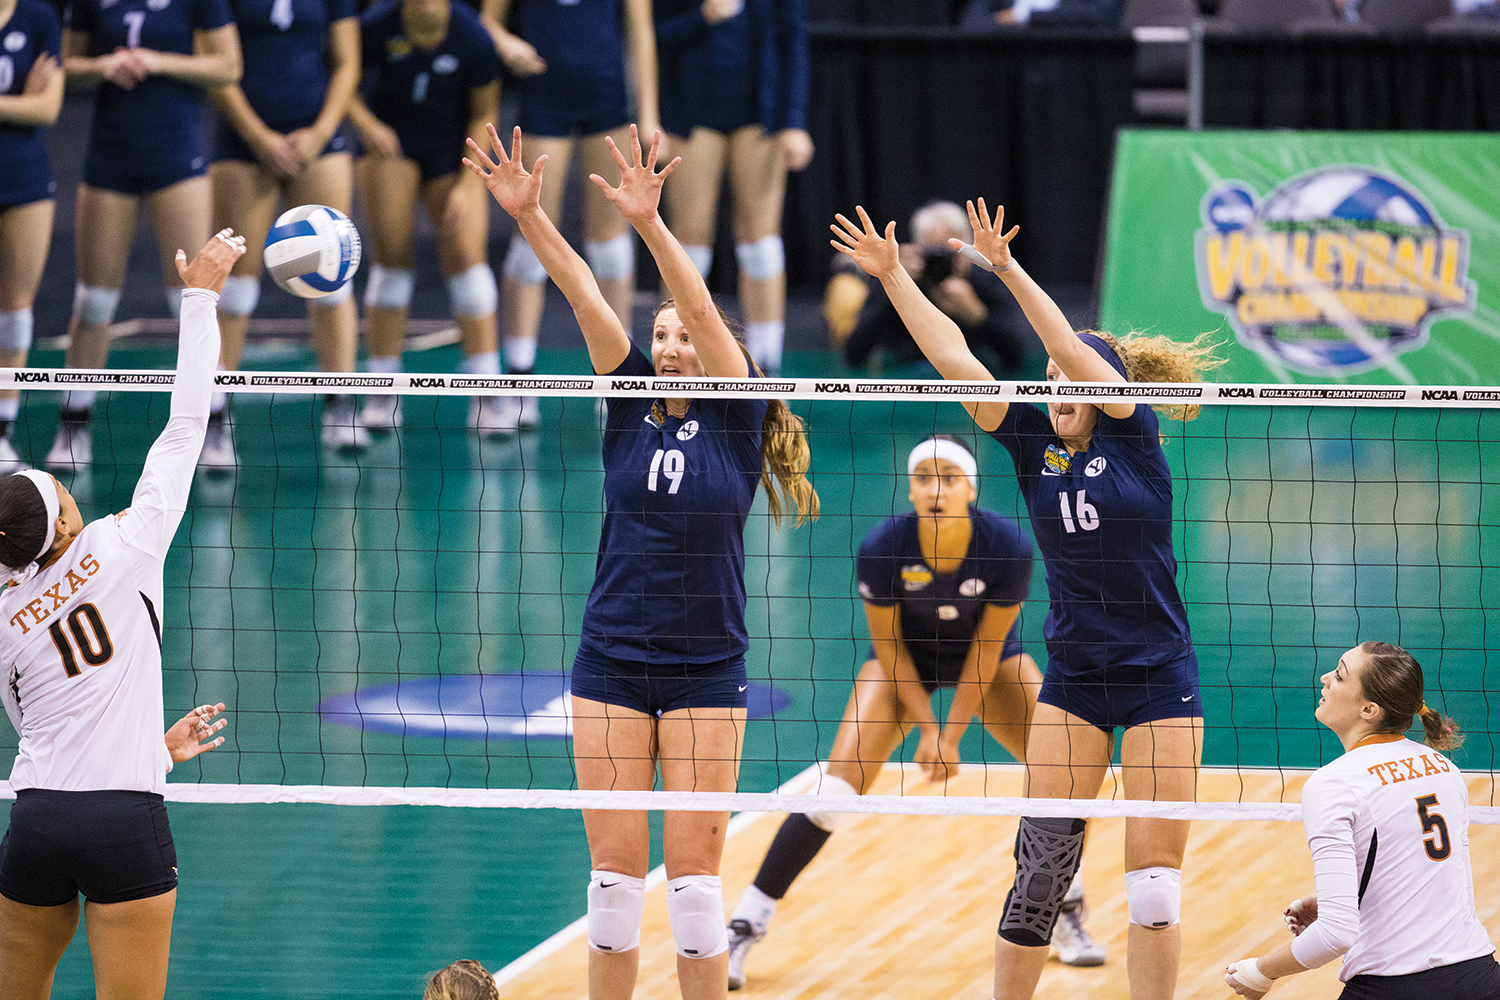 Two BYU women Volleyball players jumping to block the volleyball.